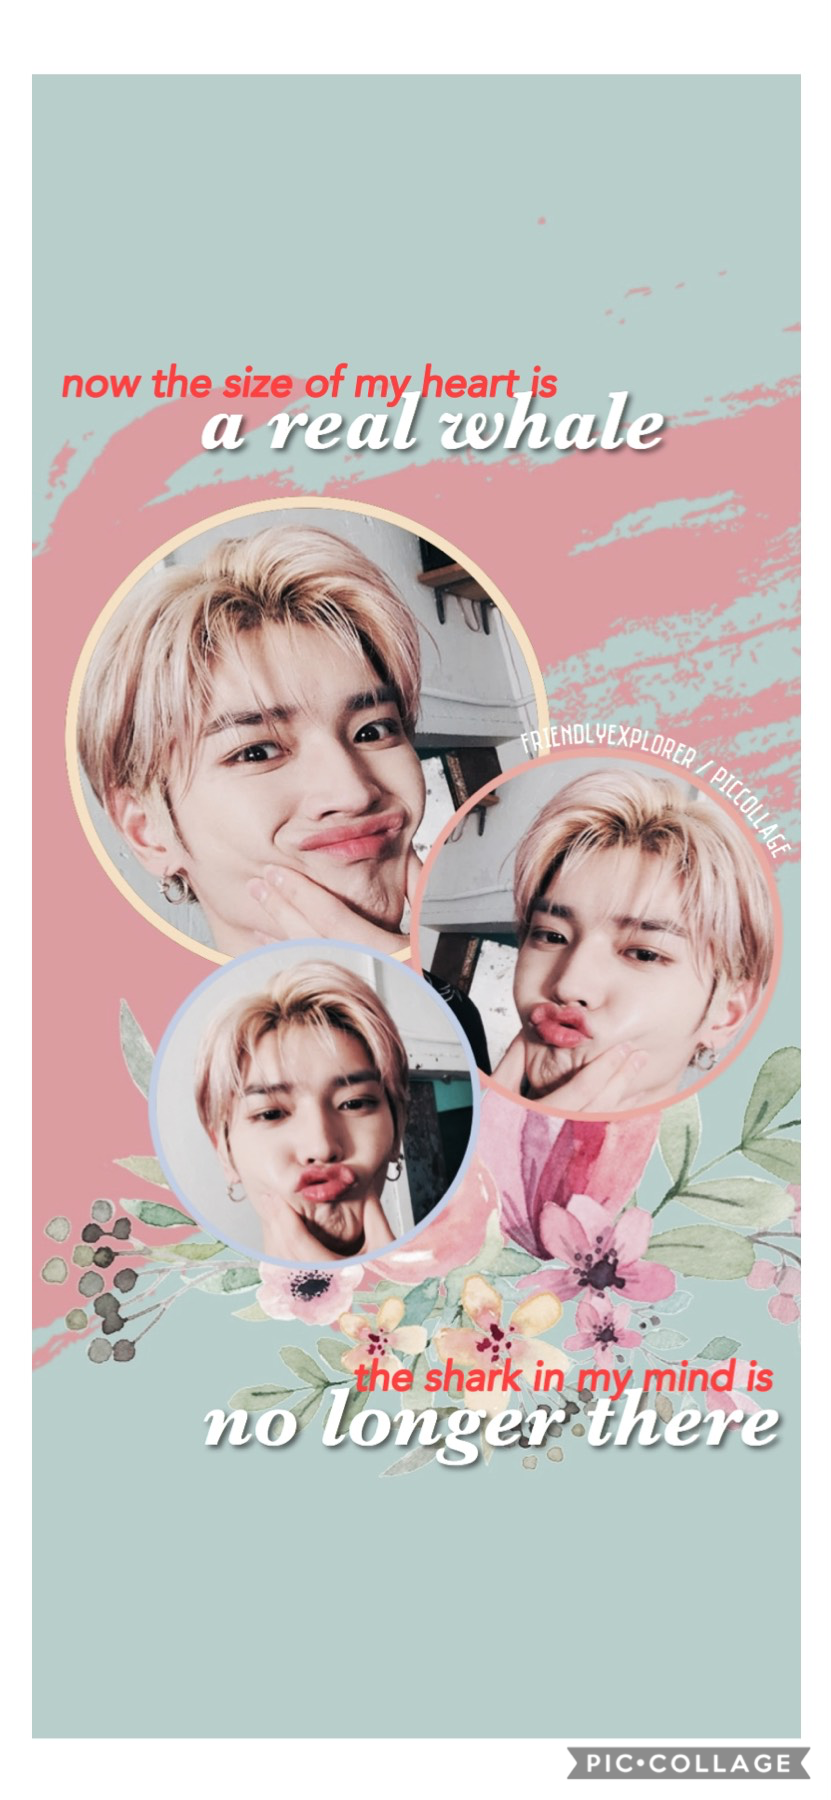 back again with another kpop collage this time! :) introducing lee taeyong, honourable leader of nct!! hope you guys like this collage as much as I enjoyed making it. it’s been a while since I’ve made a collage, and this one was such a joy to make! 🥰 #tae